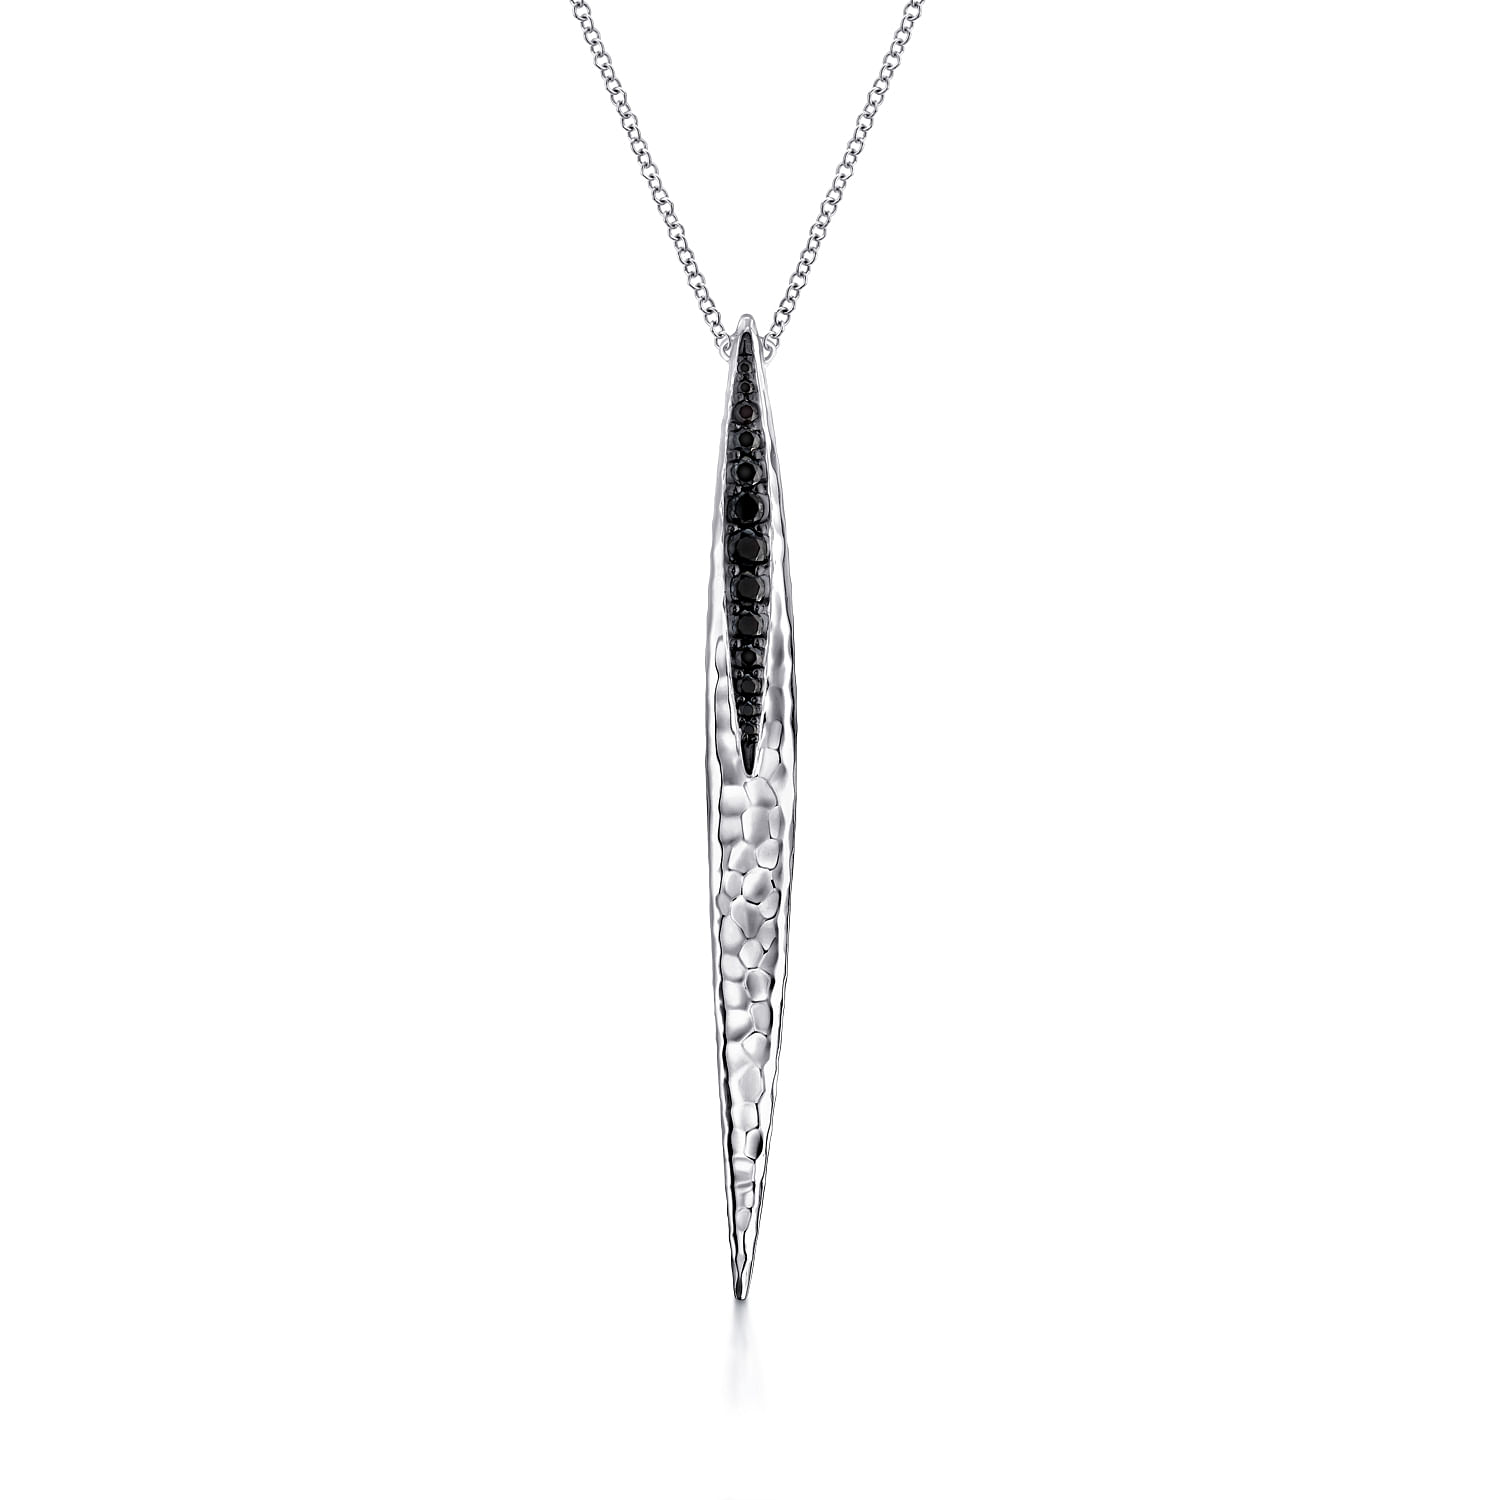 Sterling Silver Hammered Spike Pendant Necklace with Black Spinel